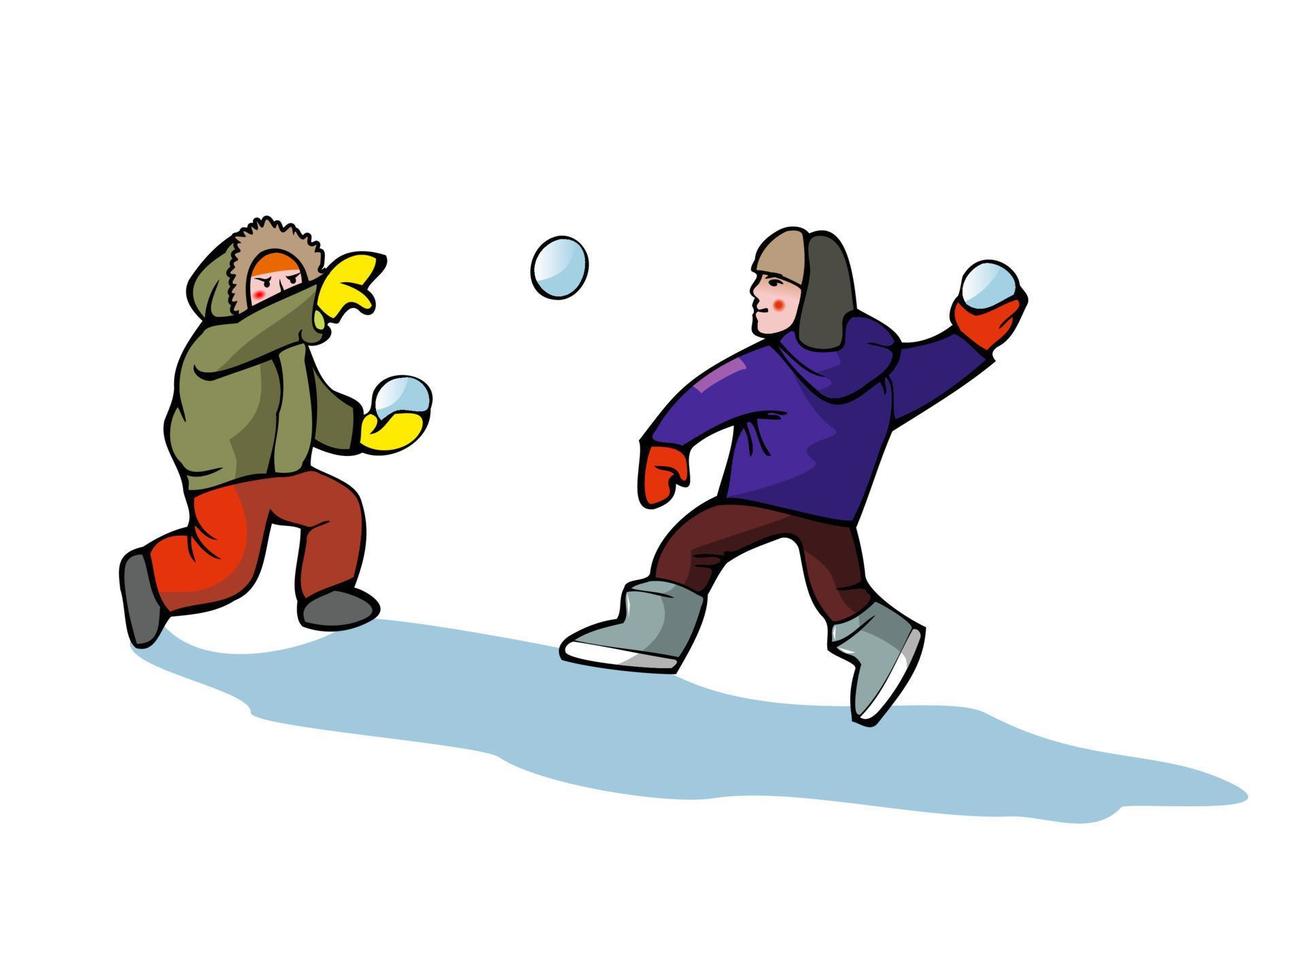 Children throwing snowballs. Snowball fight. Boys and girl playing outside in winter. Winter activity. vector